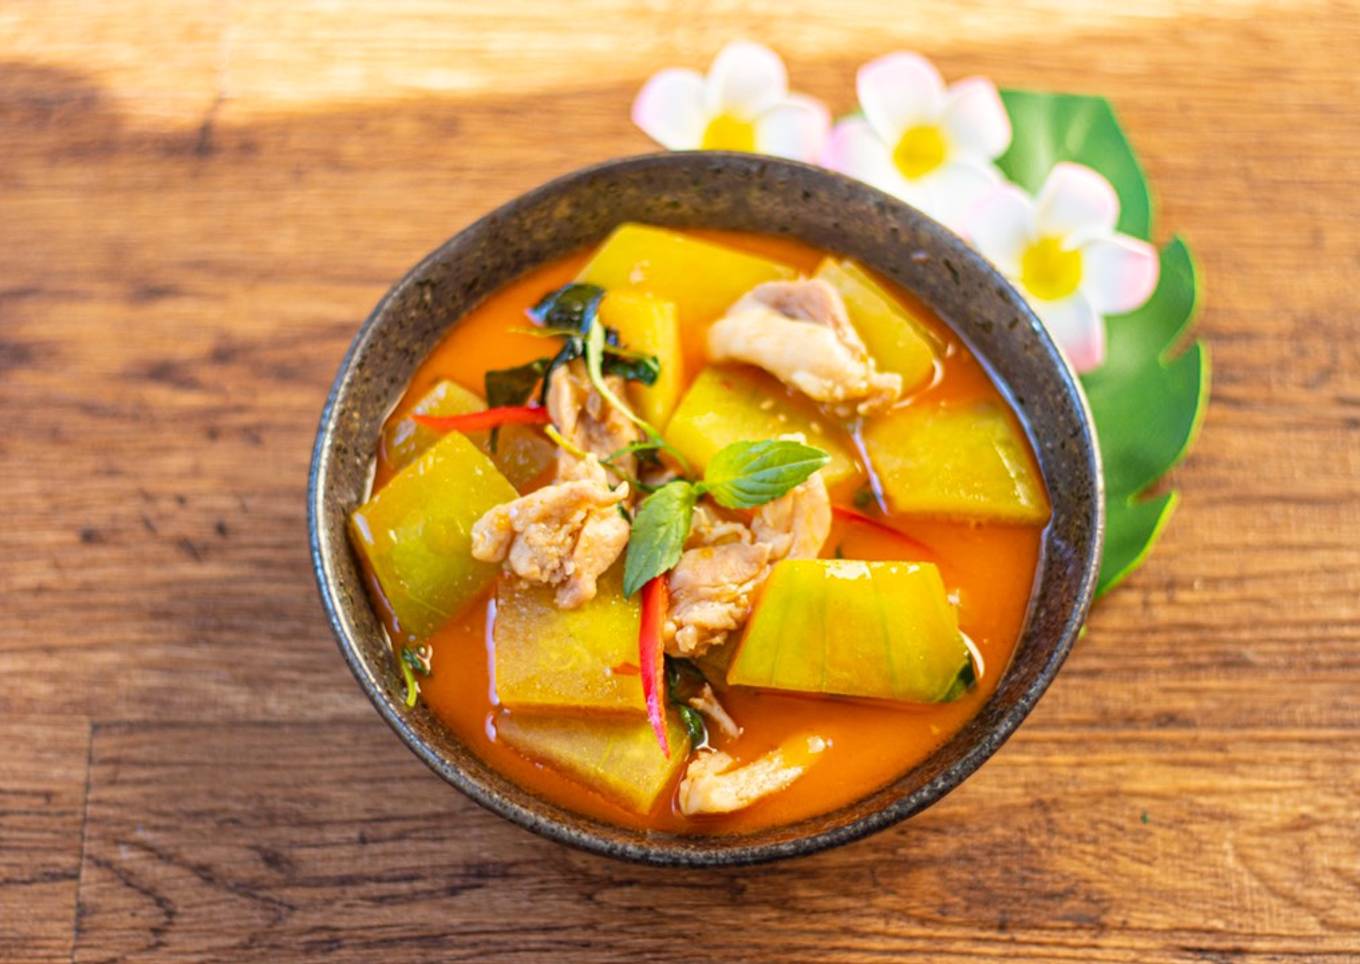 Watermelon rind Thai red curry with chicken 🍛🍉